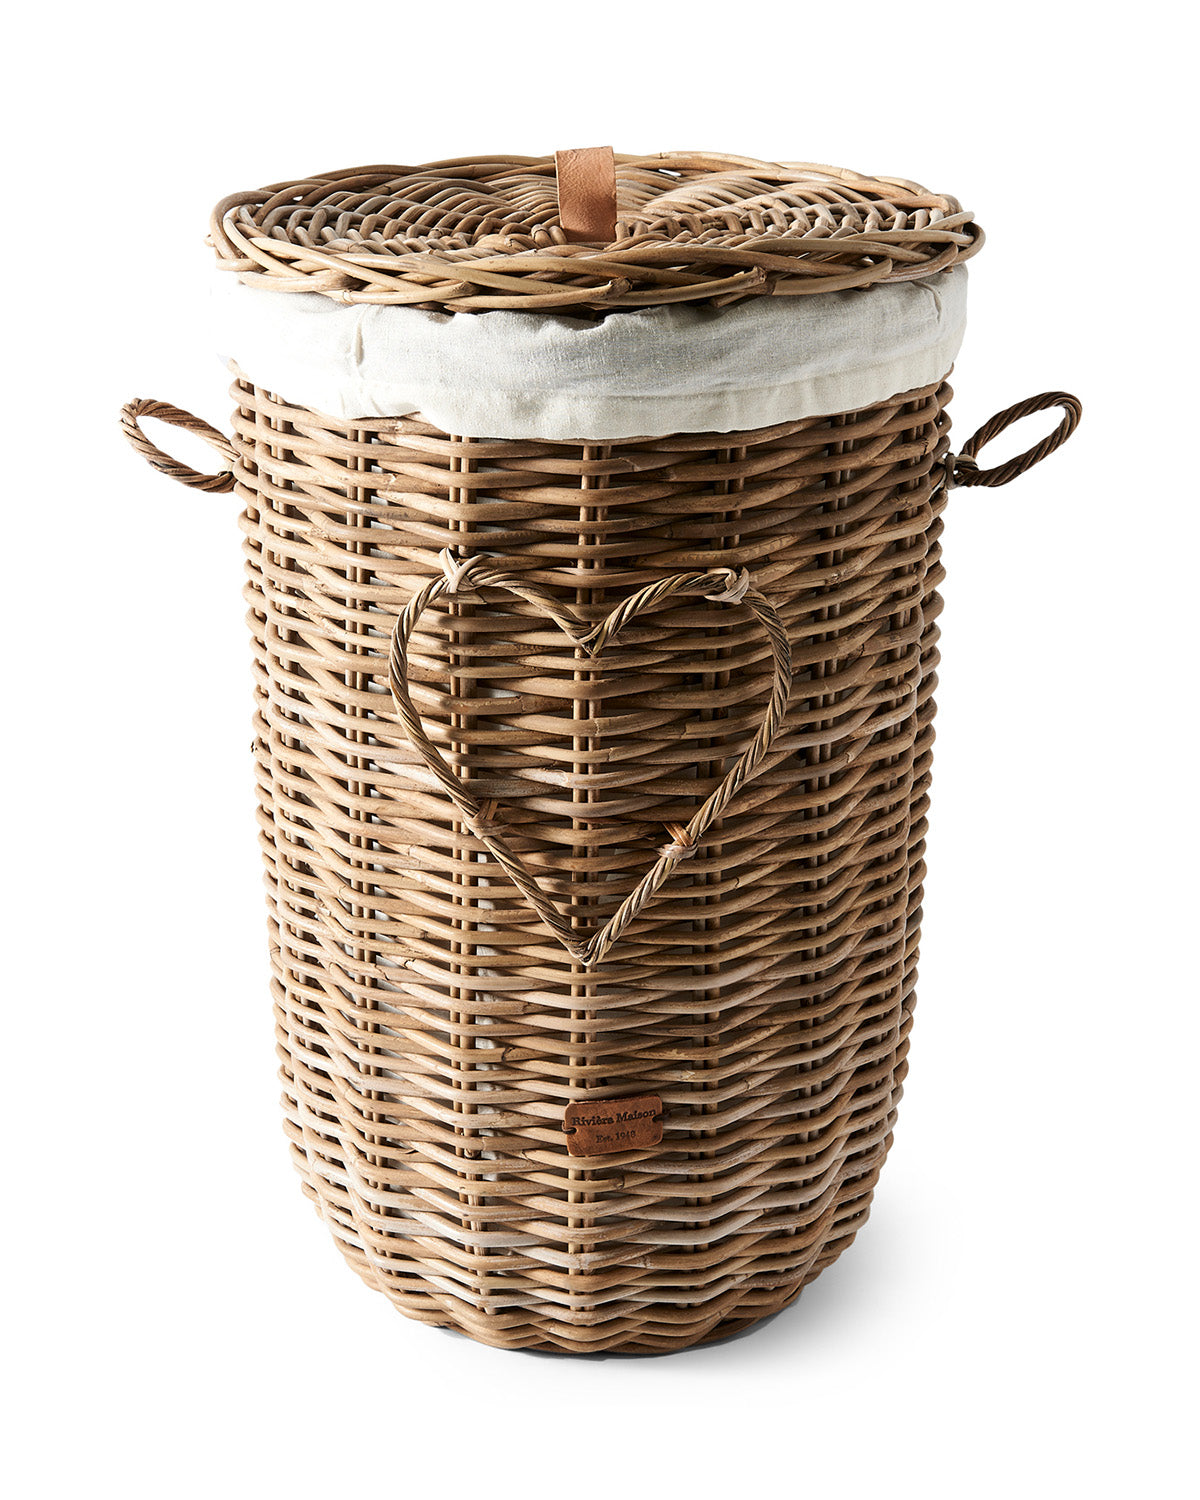 LAUNDRY BASKET made from rattan, inside the laundry basket with robust cotton by Riviera Maison